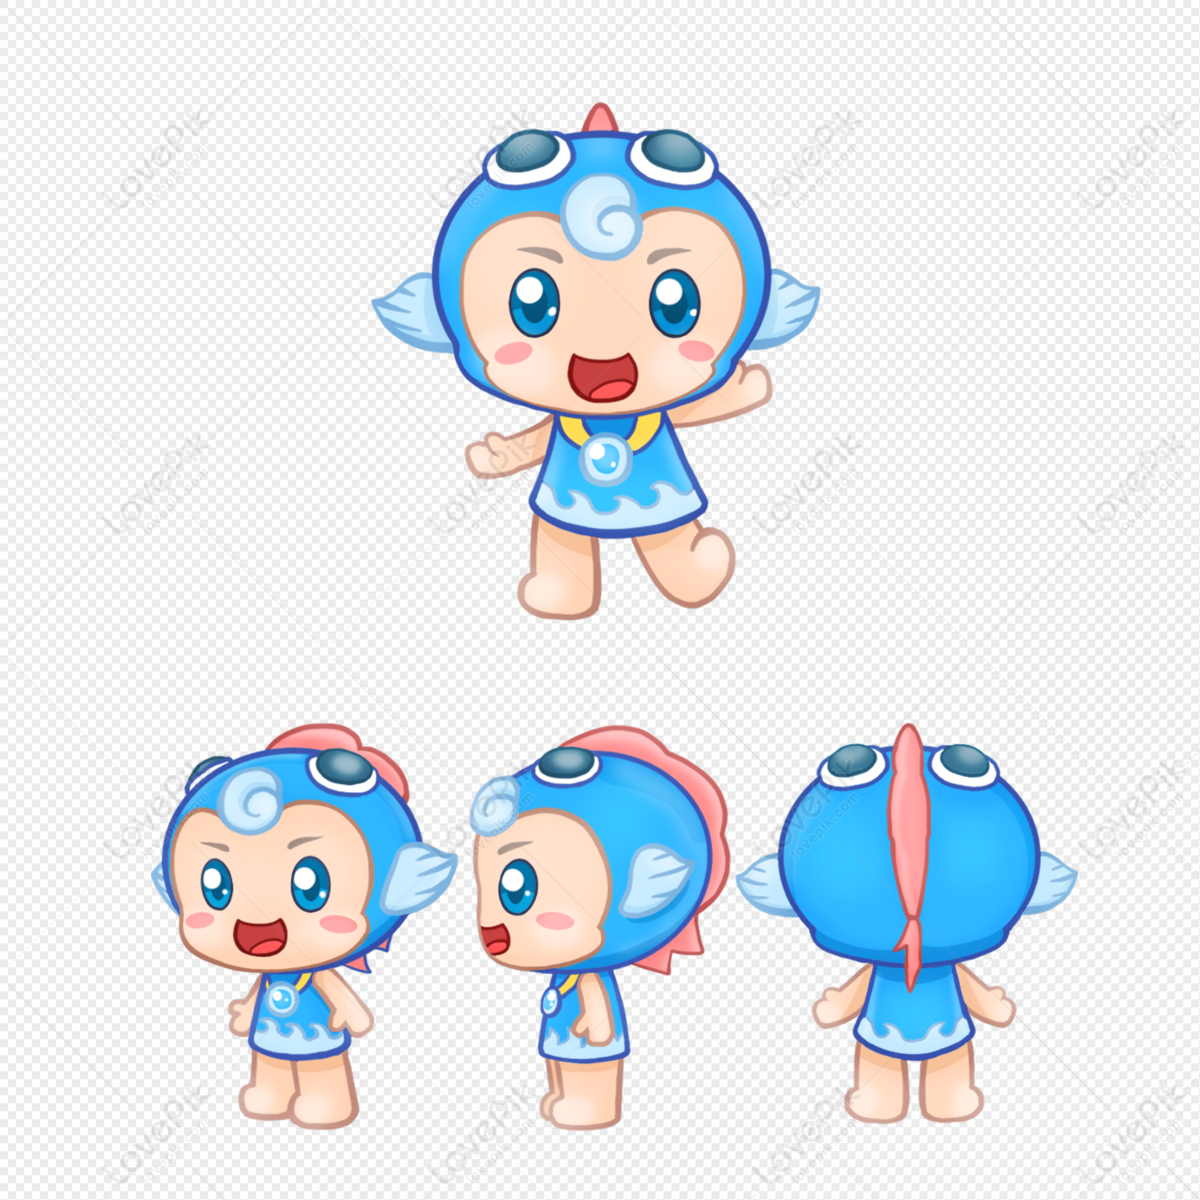 Cartoon Fish Baby Mascot PNG Transparent And Clipart Image For Free  Download - Lovepik | 401560076